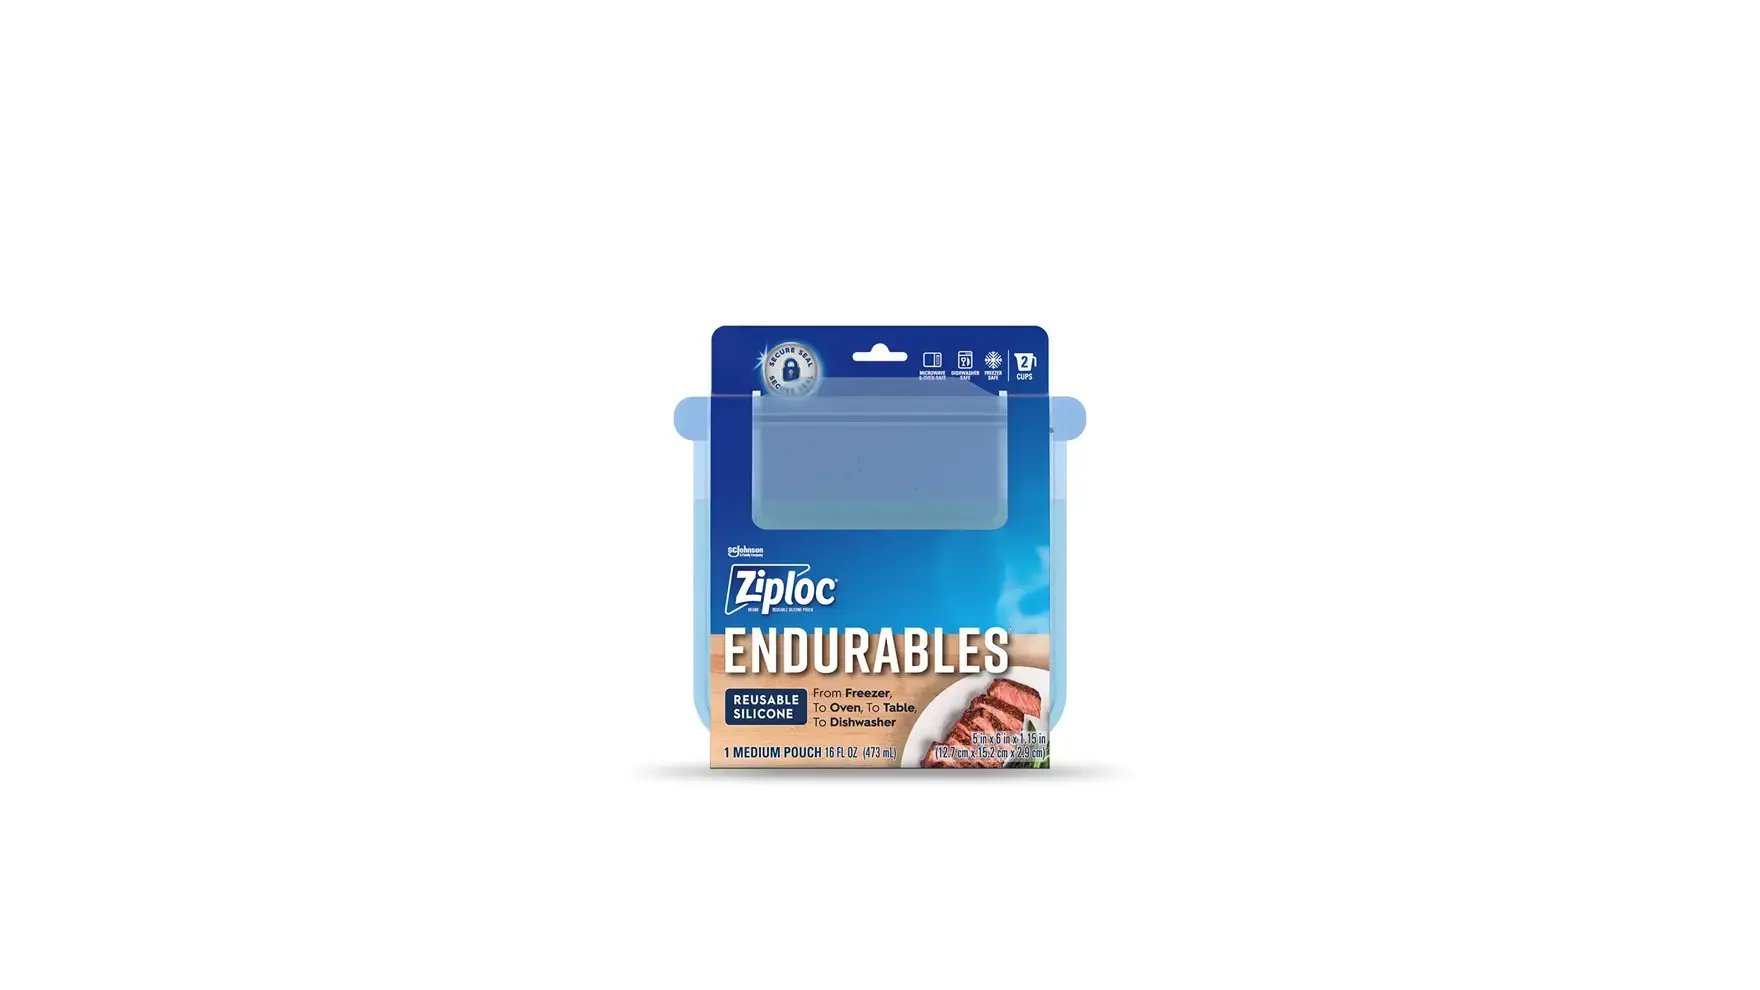  Ziploc Endurables Small, Medium, and Large Pouch, Reusable  Silicone Bags and Food Storage Meal Prep Containers for Freezer, Oven, and  Microwave, Dishwasher Safe : Health & Household